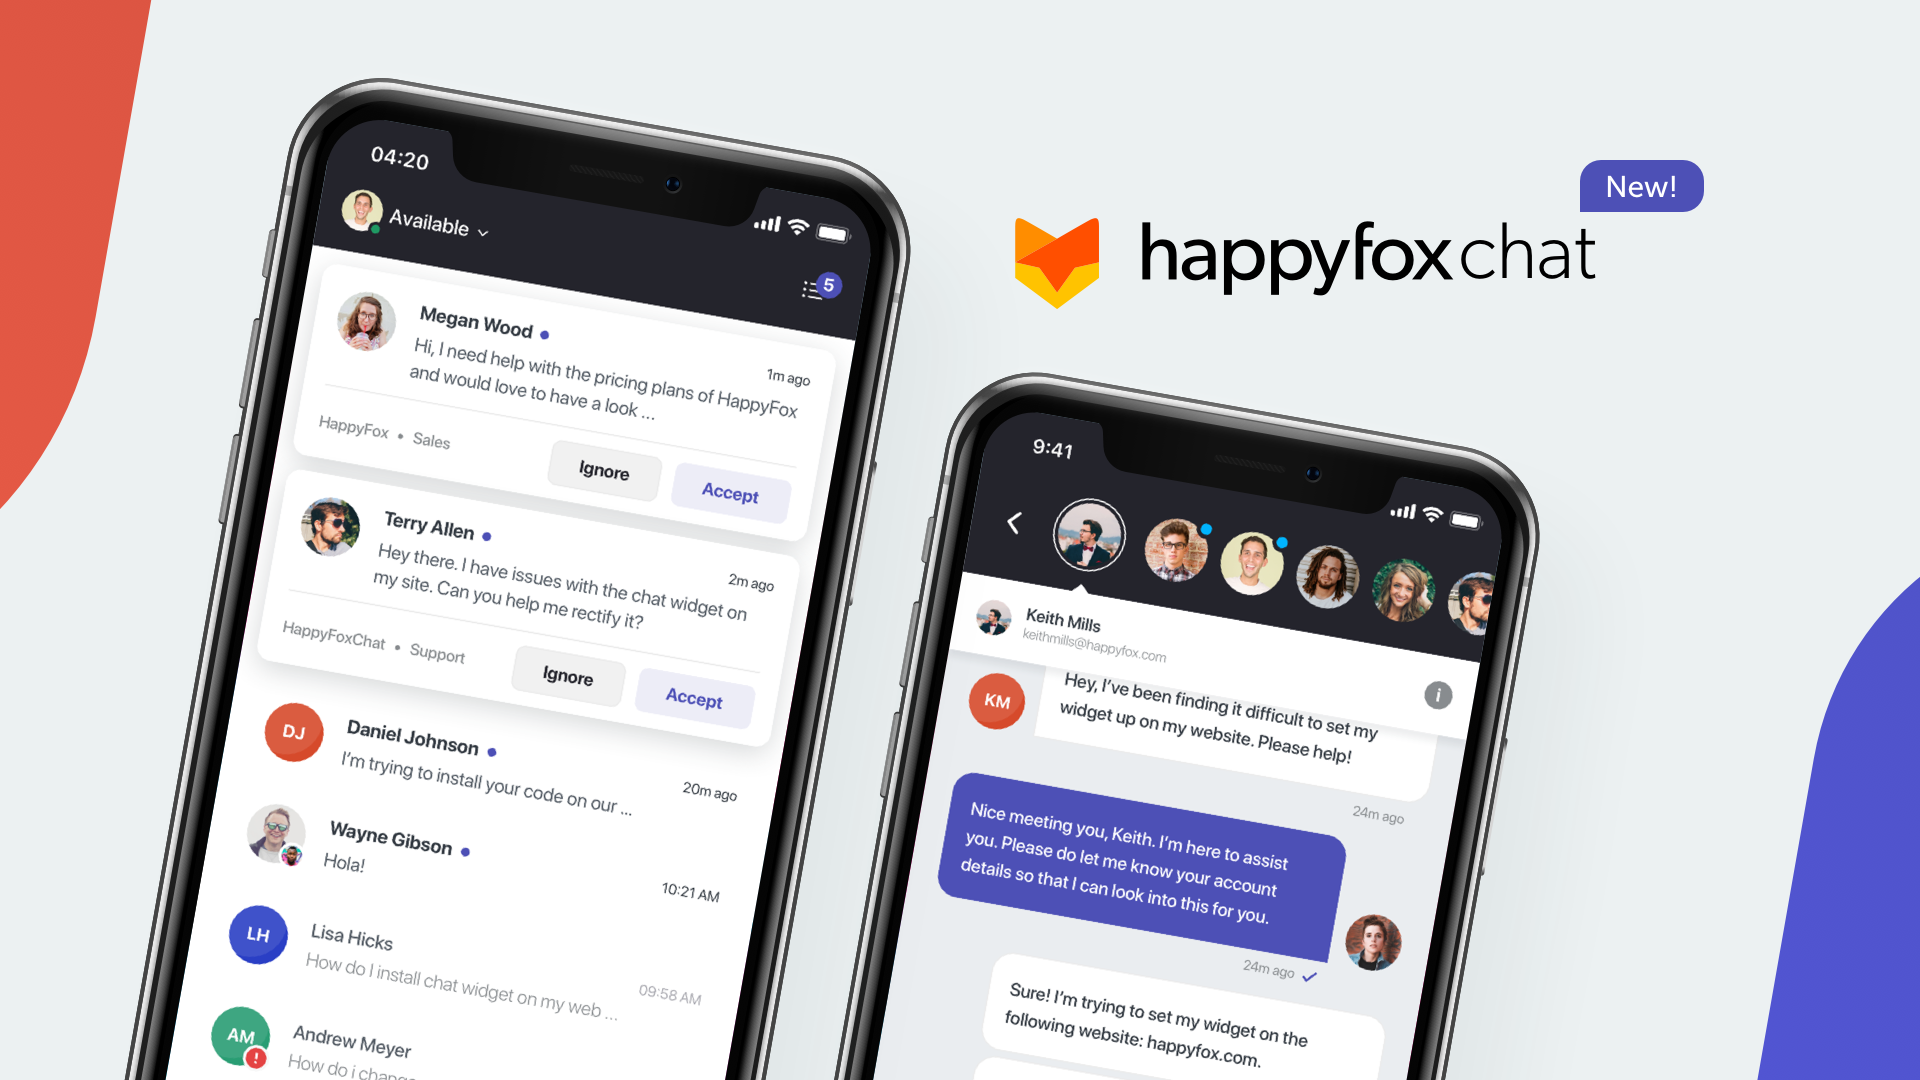 Preview: New HappyFox Chat Mobile App